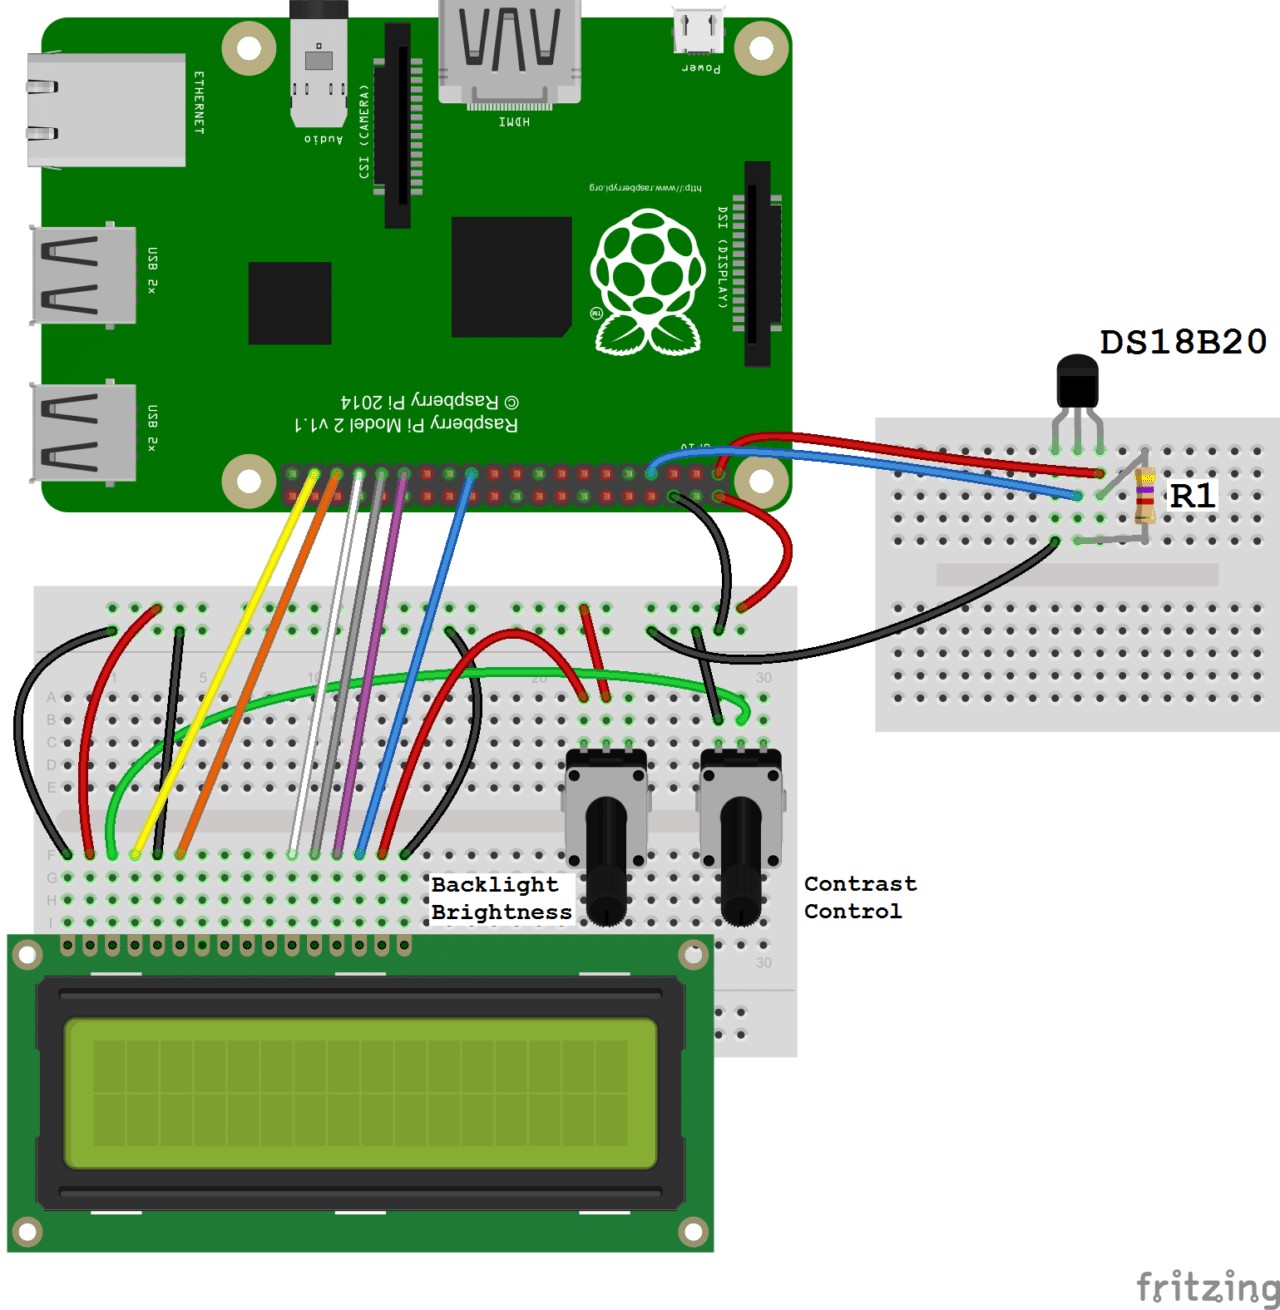 Follow this diagram to output the temperature readings to an LCD Raspberry Pi